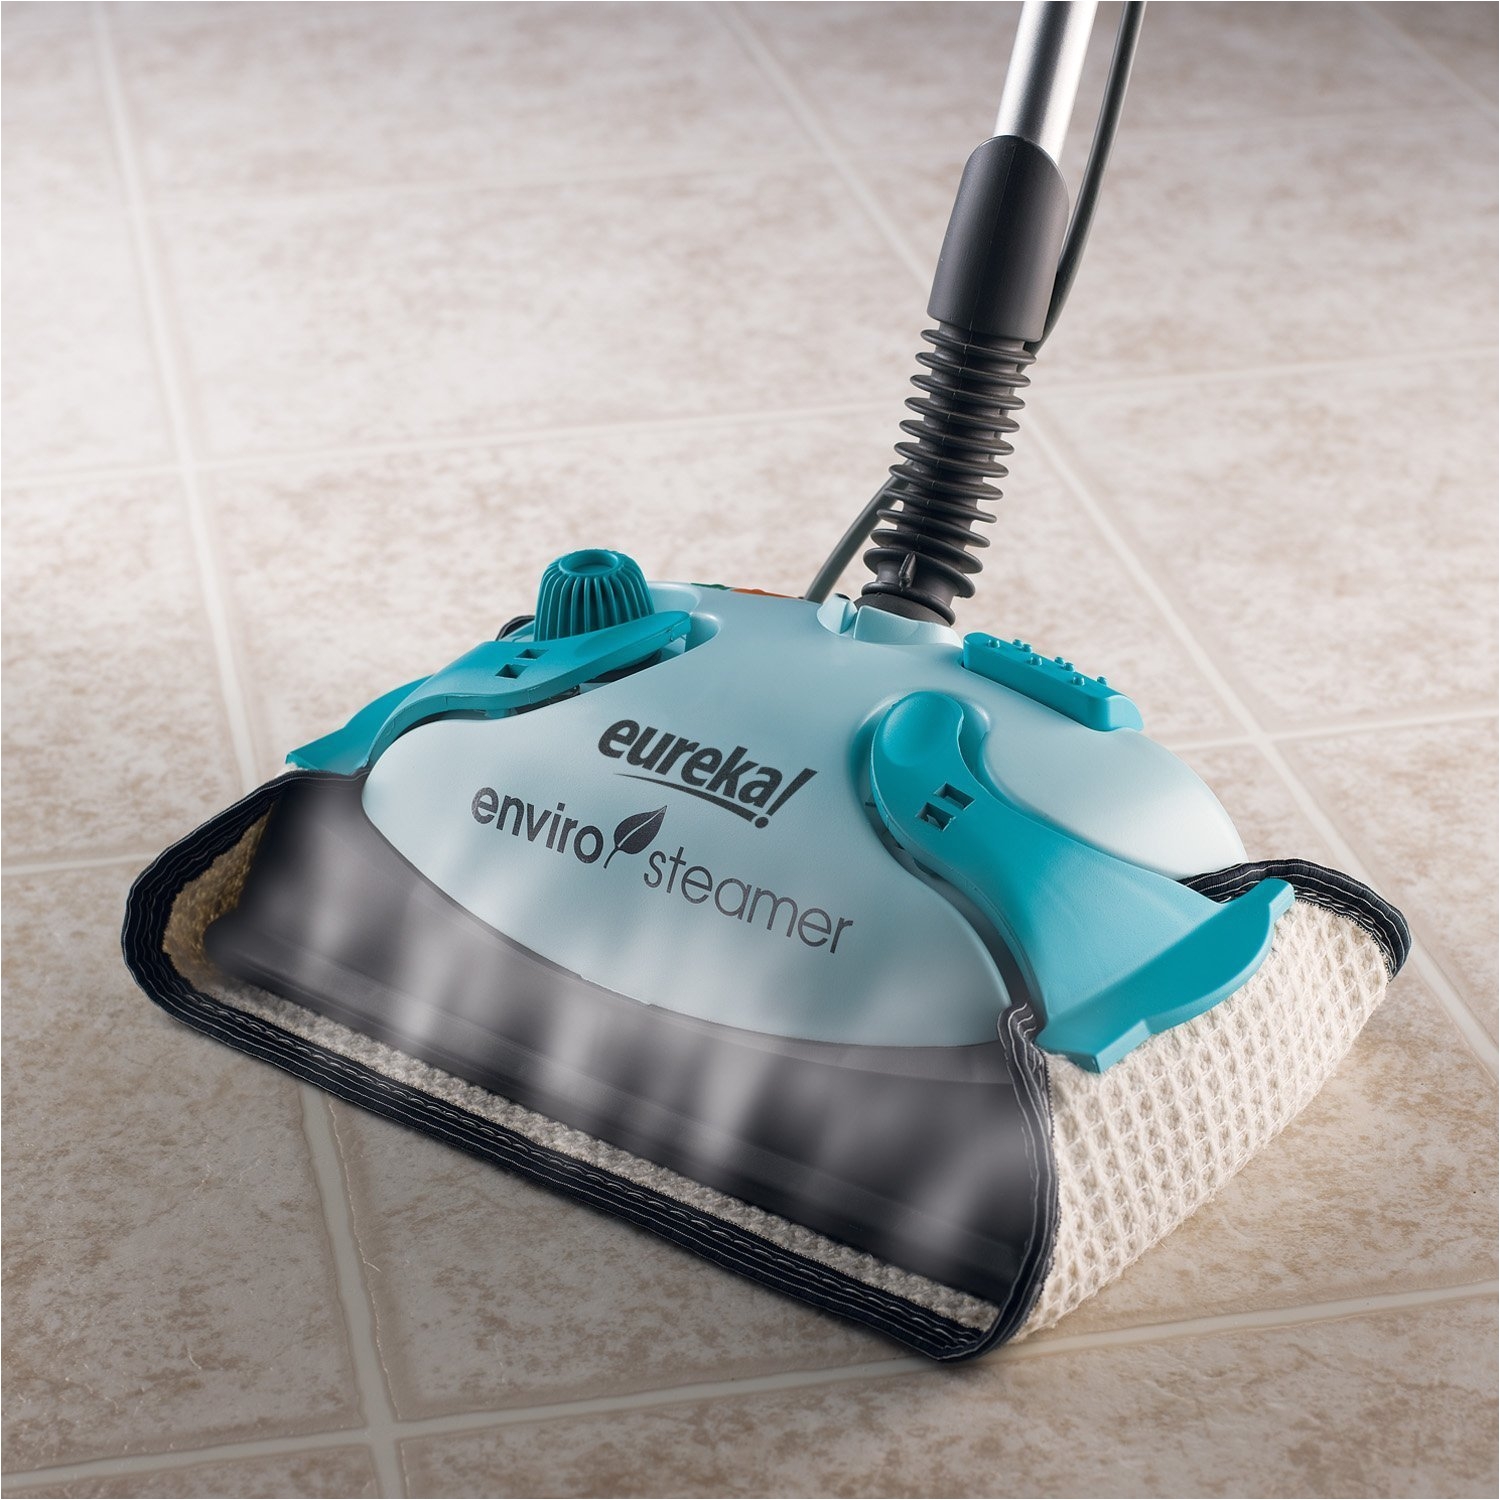 Best Steam Cleaner for Hardwood Floors New Steam Cleaner for Bathrooms and Kitchens Amazing Bathroom Idea